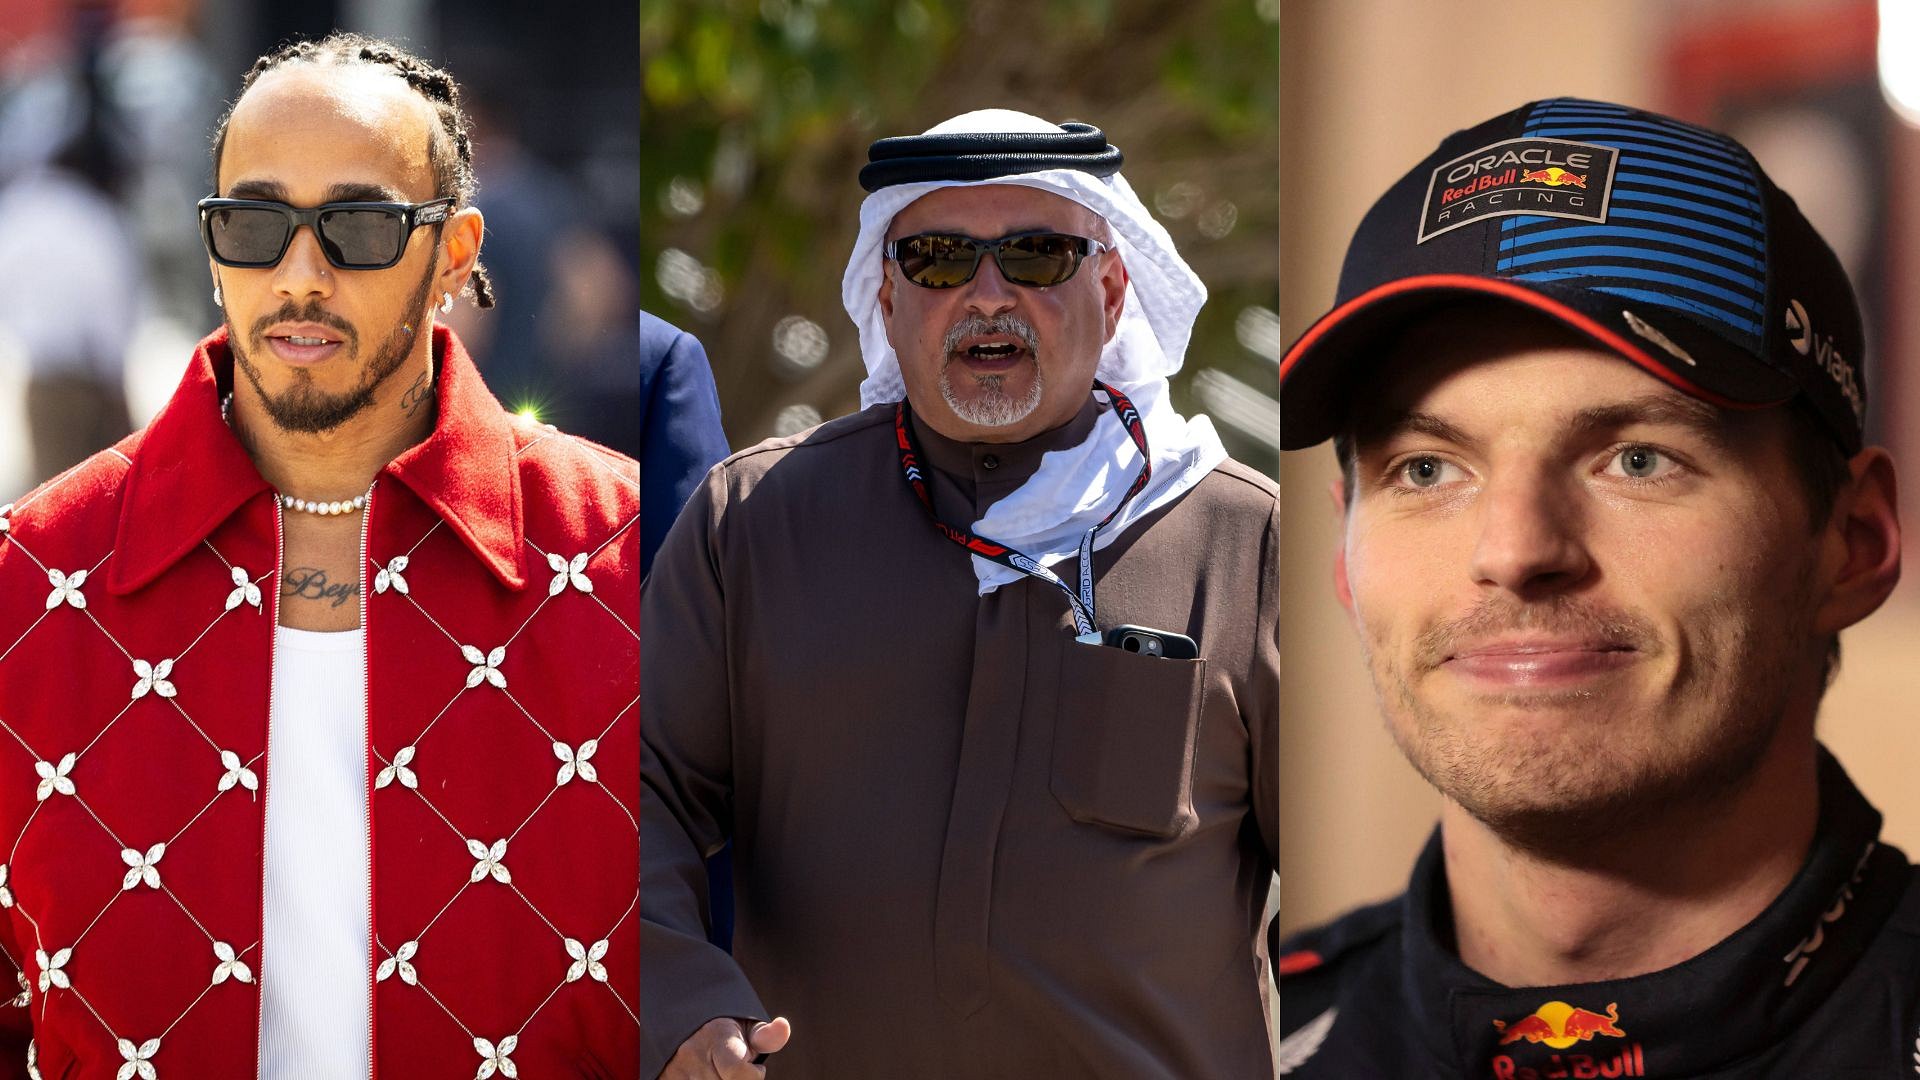 What Is an F1 Grand Slam? - Which Driver Has the Most Grand Slams